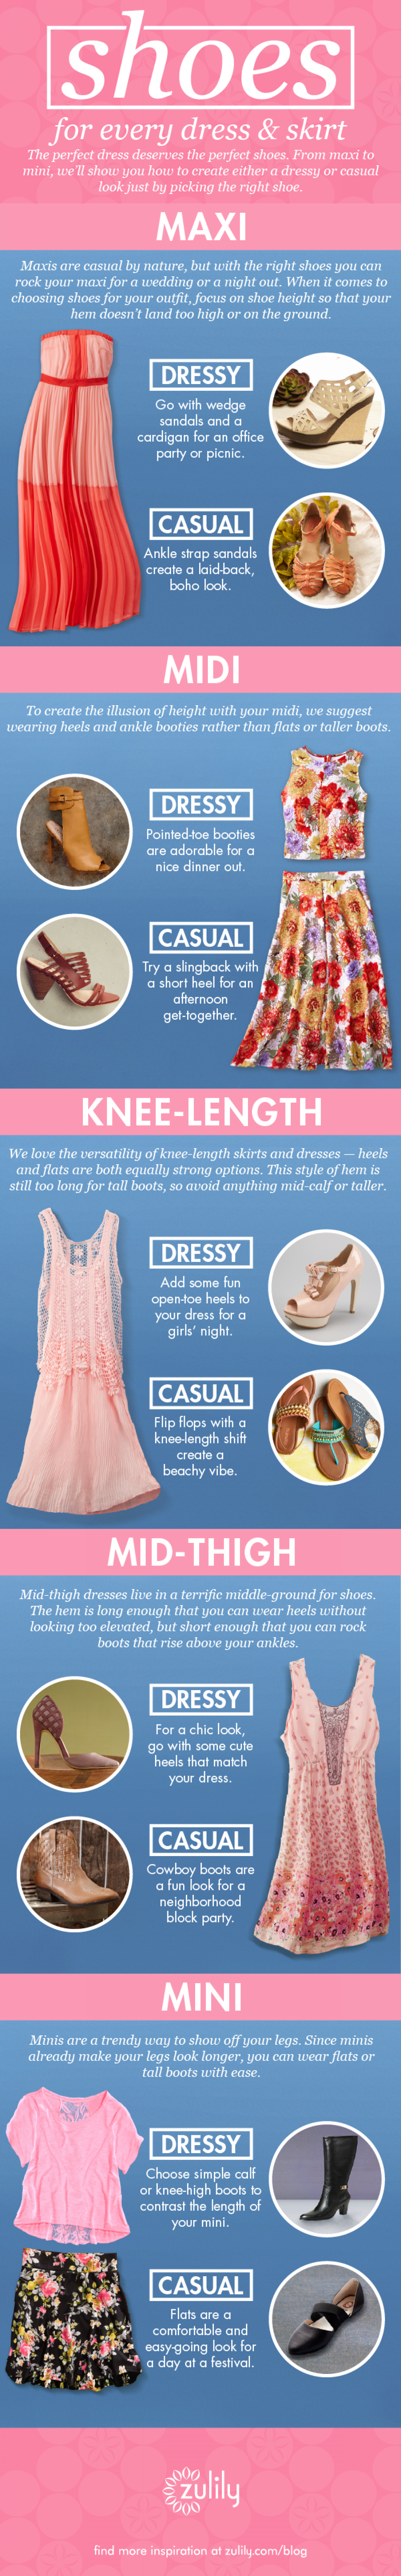 Shoes for Every Dress and Skirt Infographic